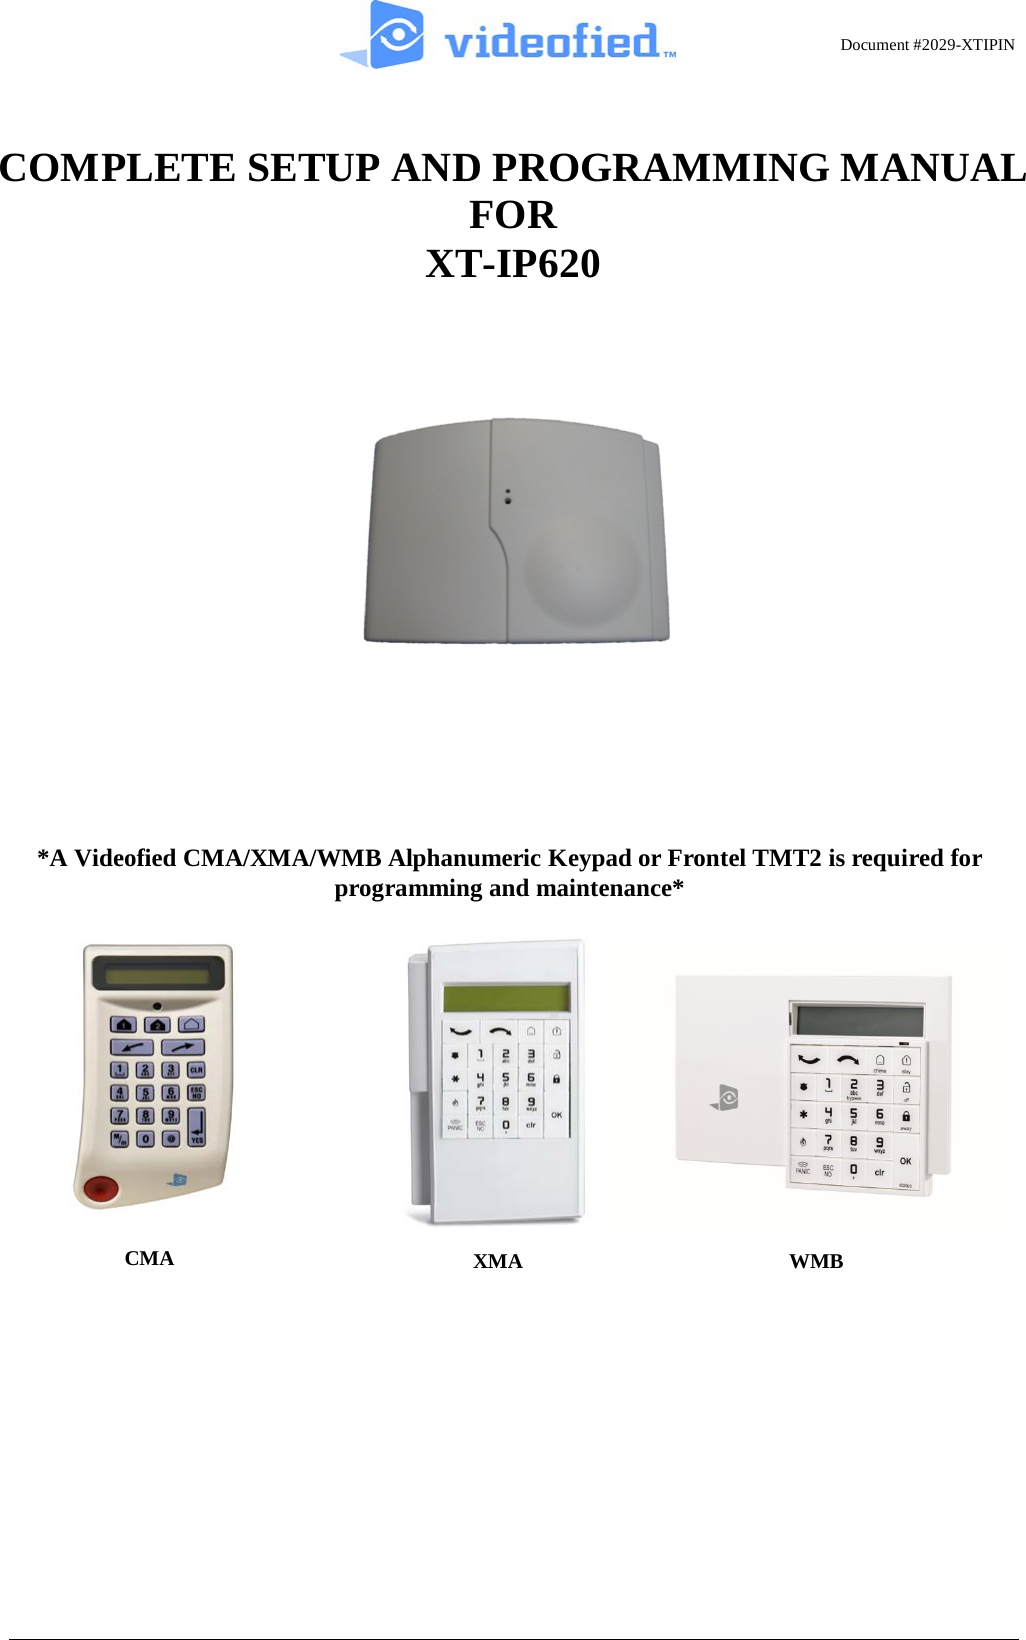 Document #2029-XTIPIN    COMPLETE SETUP AND PROGRAMMING MANUAL FOR XT-IP620  *A Videofied CMA/XMA/WMB Alphanumeric Keypad or Frontel TMT2 is required for programming and maintenance* CMA XMA WMB 